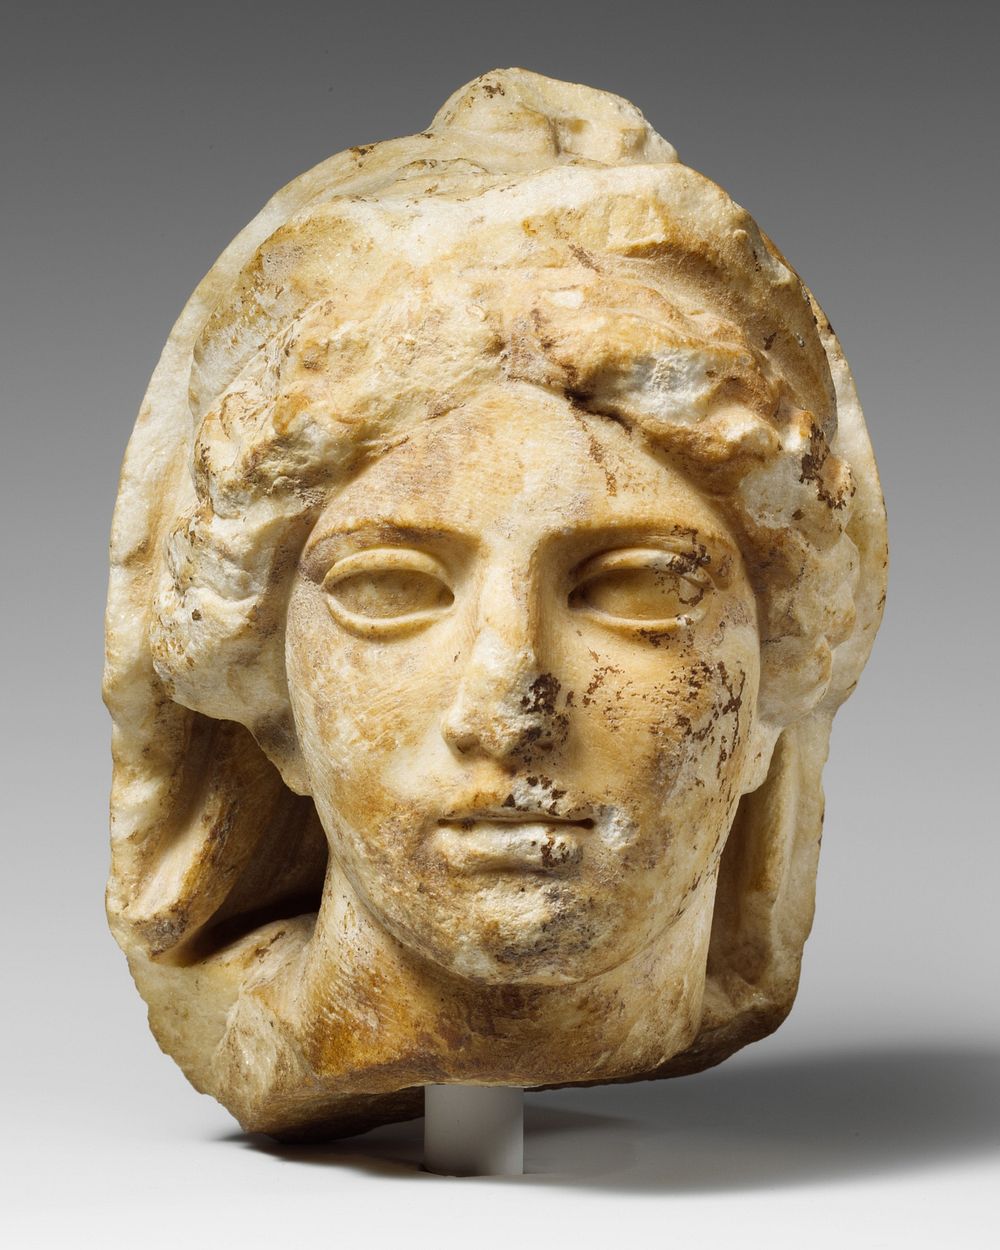 Marble head of a woman wearing diadem and veil